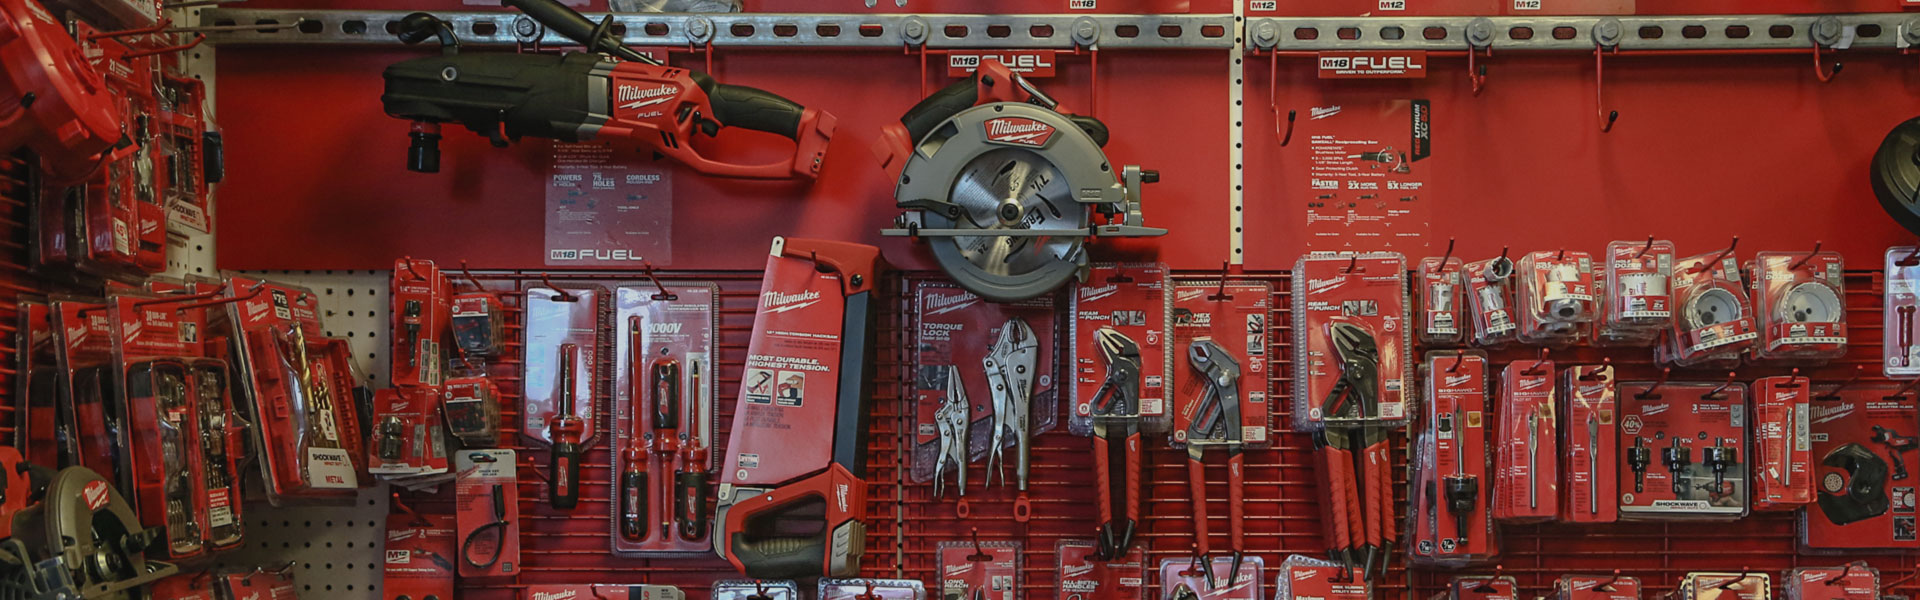 A red wall with many different tools on it